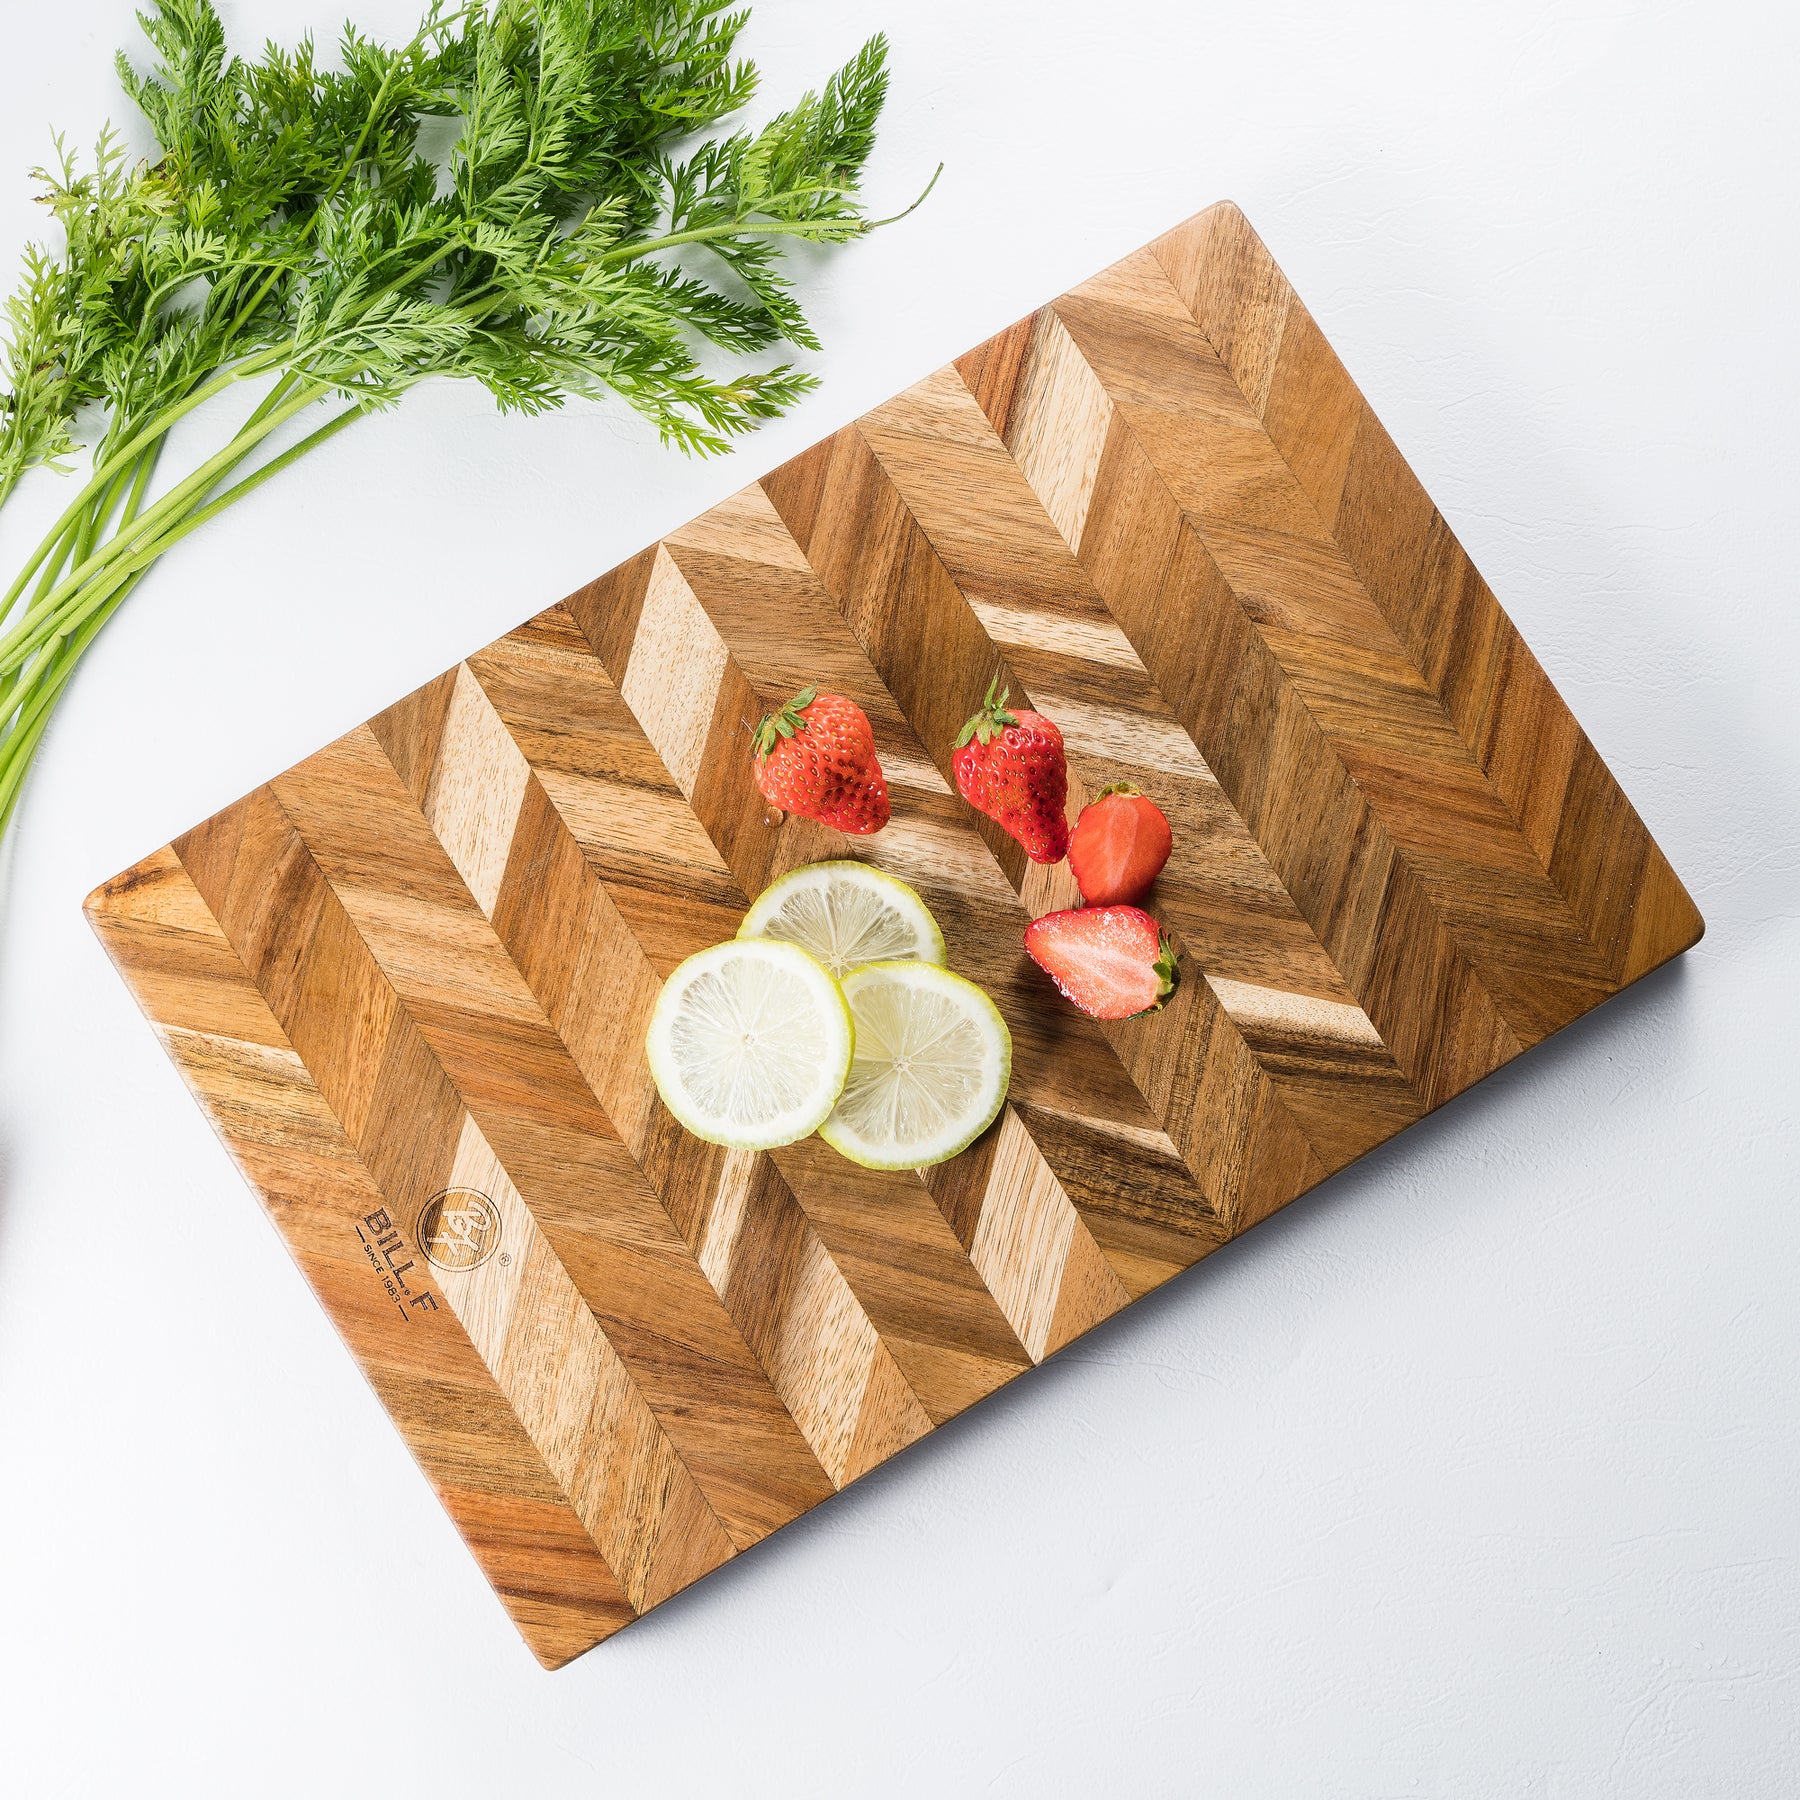 Extra Thick Wooden Cutting Board - Perfect For Meat, Cheese, Bread